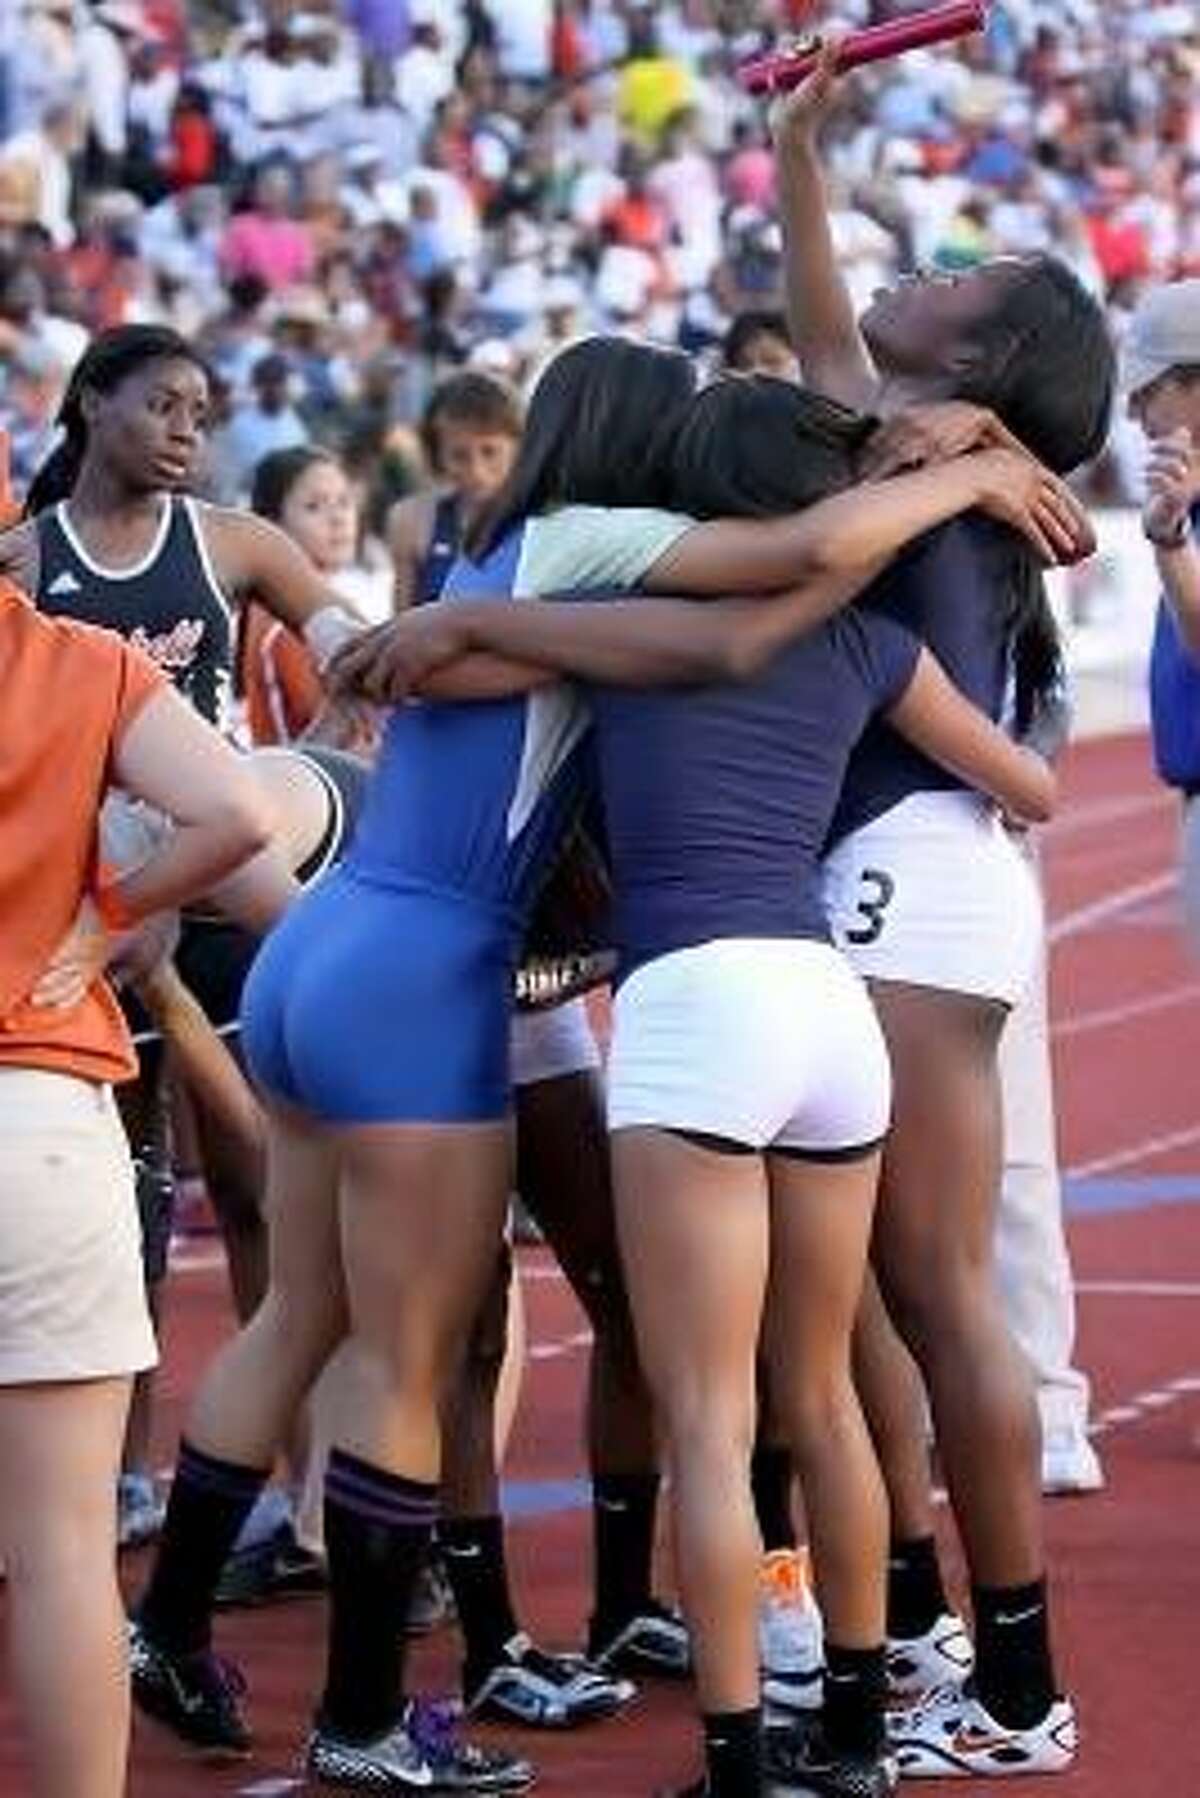 The Lamar girls celebrate their 1,600-meter relay victory with Taylor Houston of Elkins, which finished third.